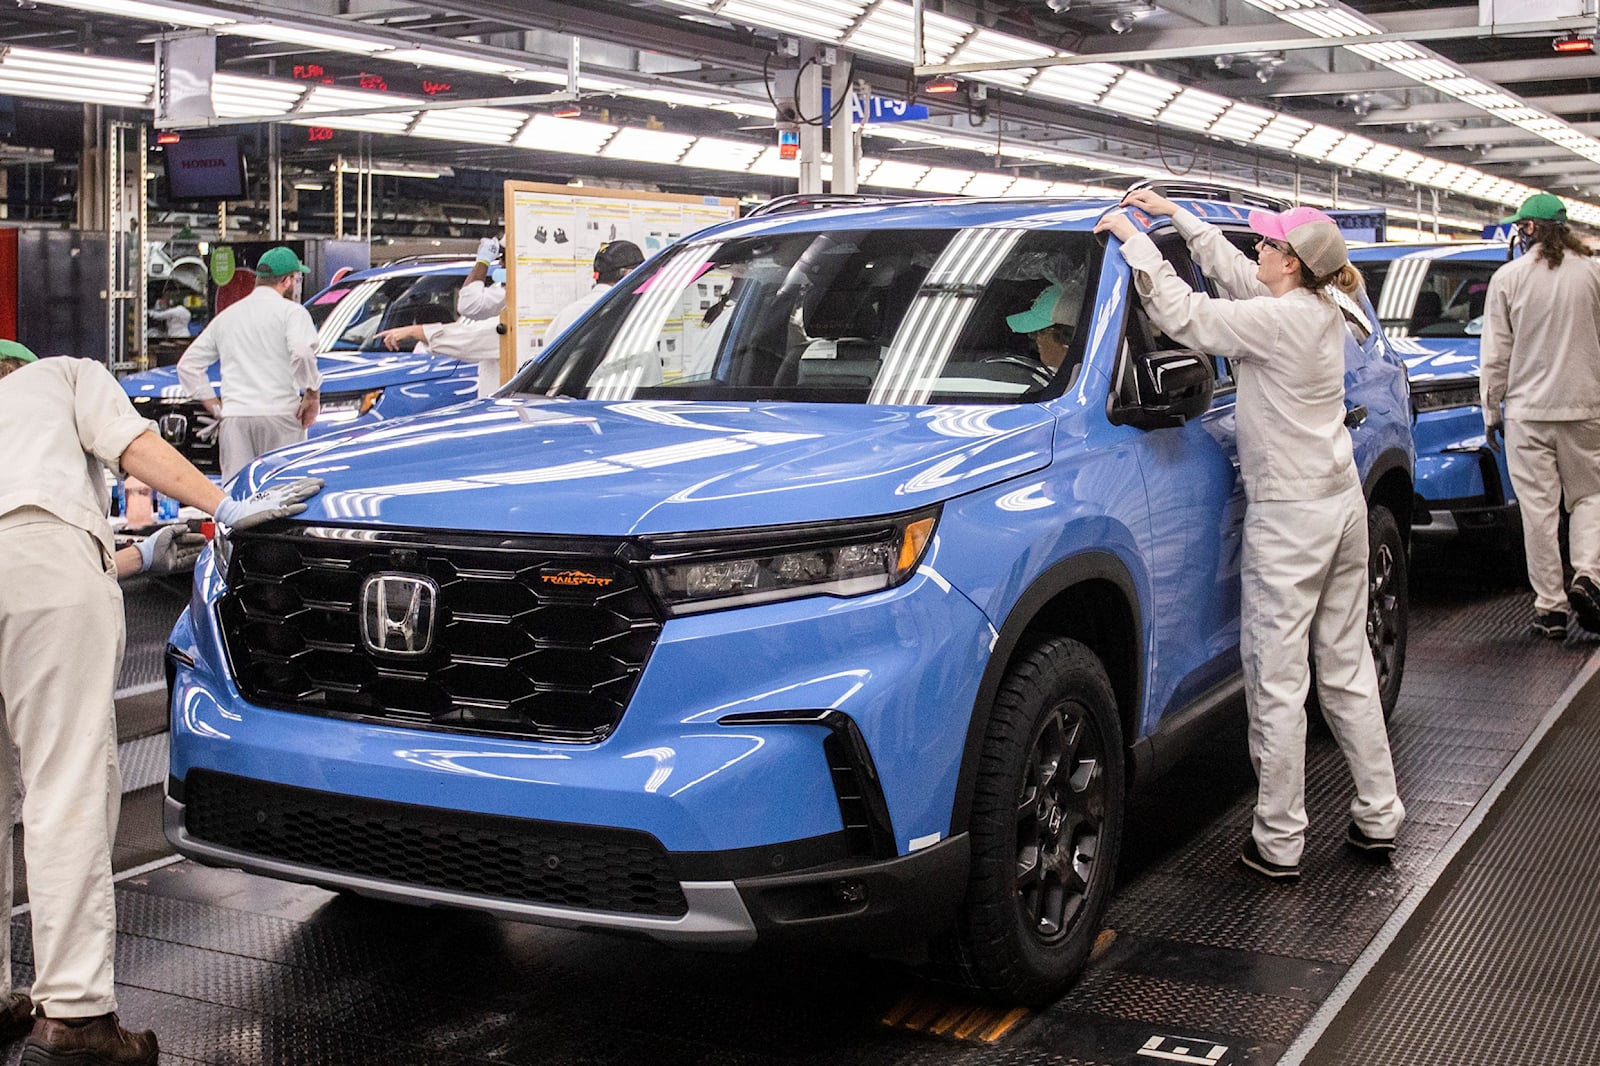 2023 Honda Pilot Production Begins: All You Need to Know